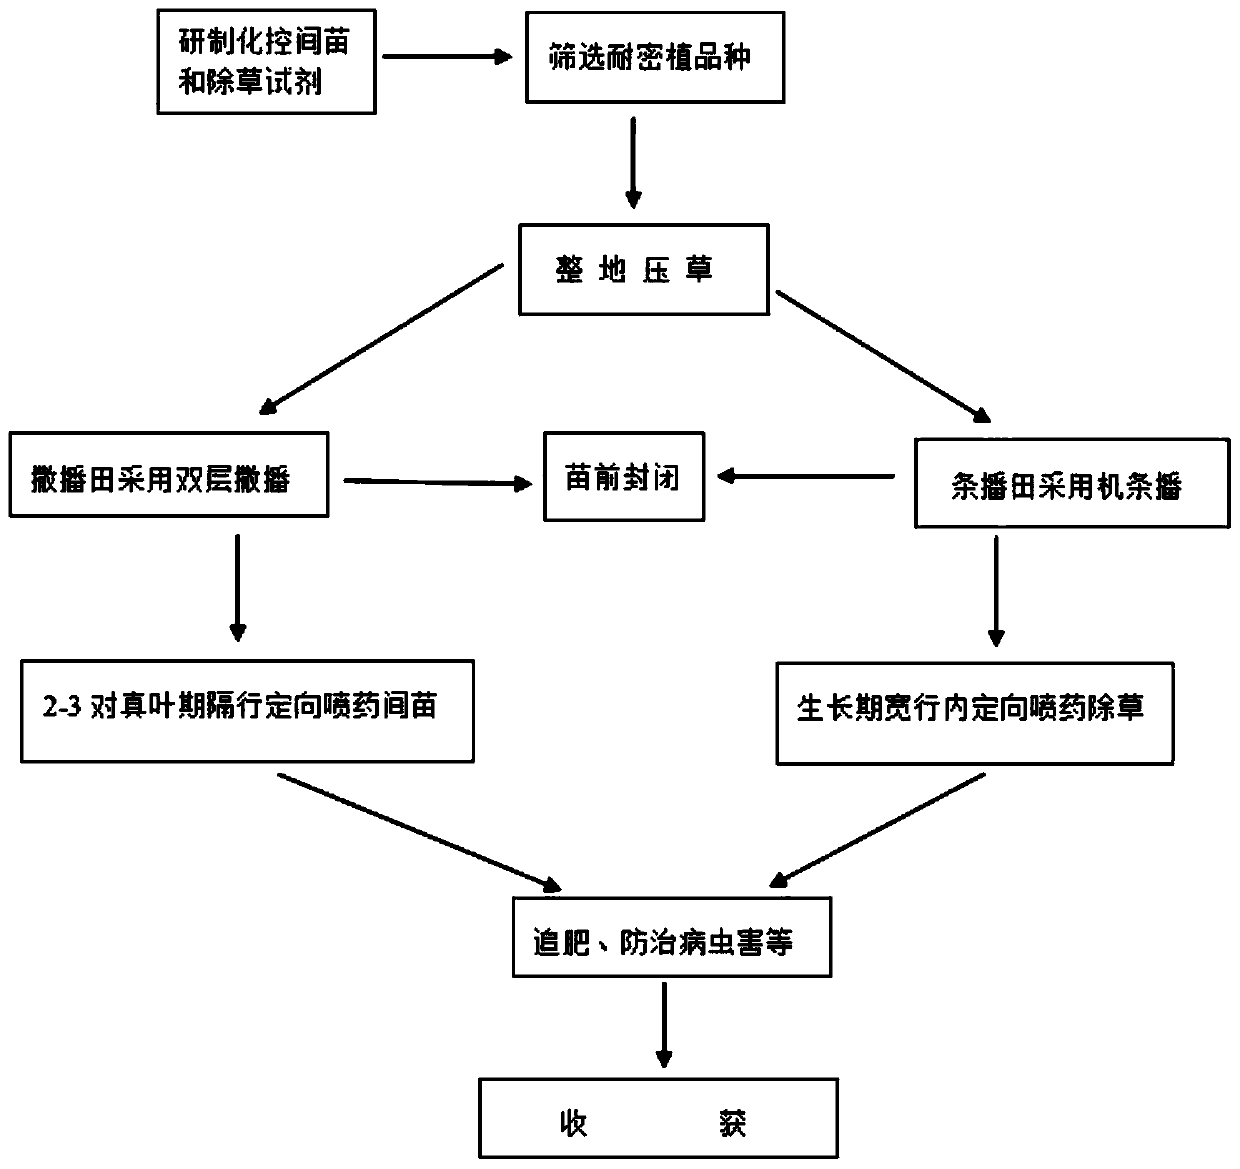 A kind of sesame thinning agent and its application method in sesame planting